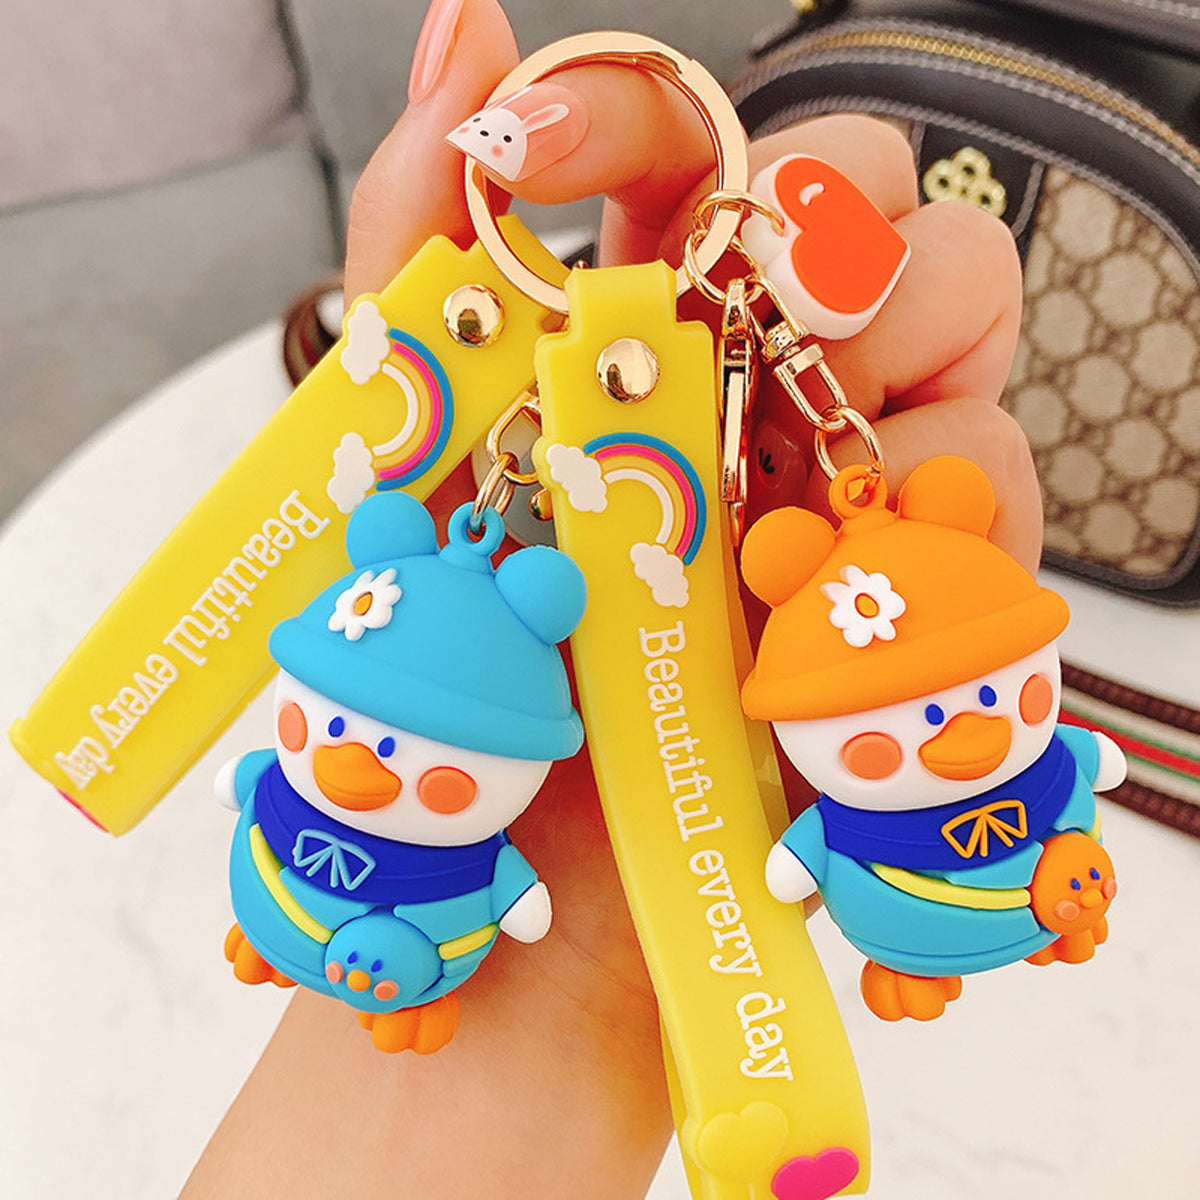 Shop Wholesale Duck with Hat Keychains - Add Some Quirky Flair to Your Key Collection